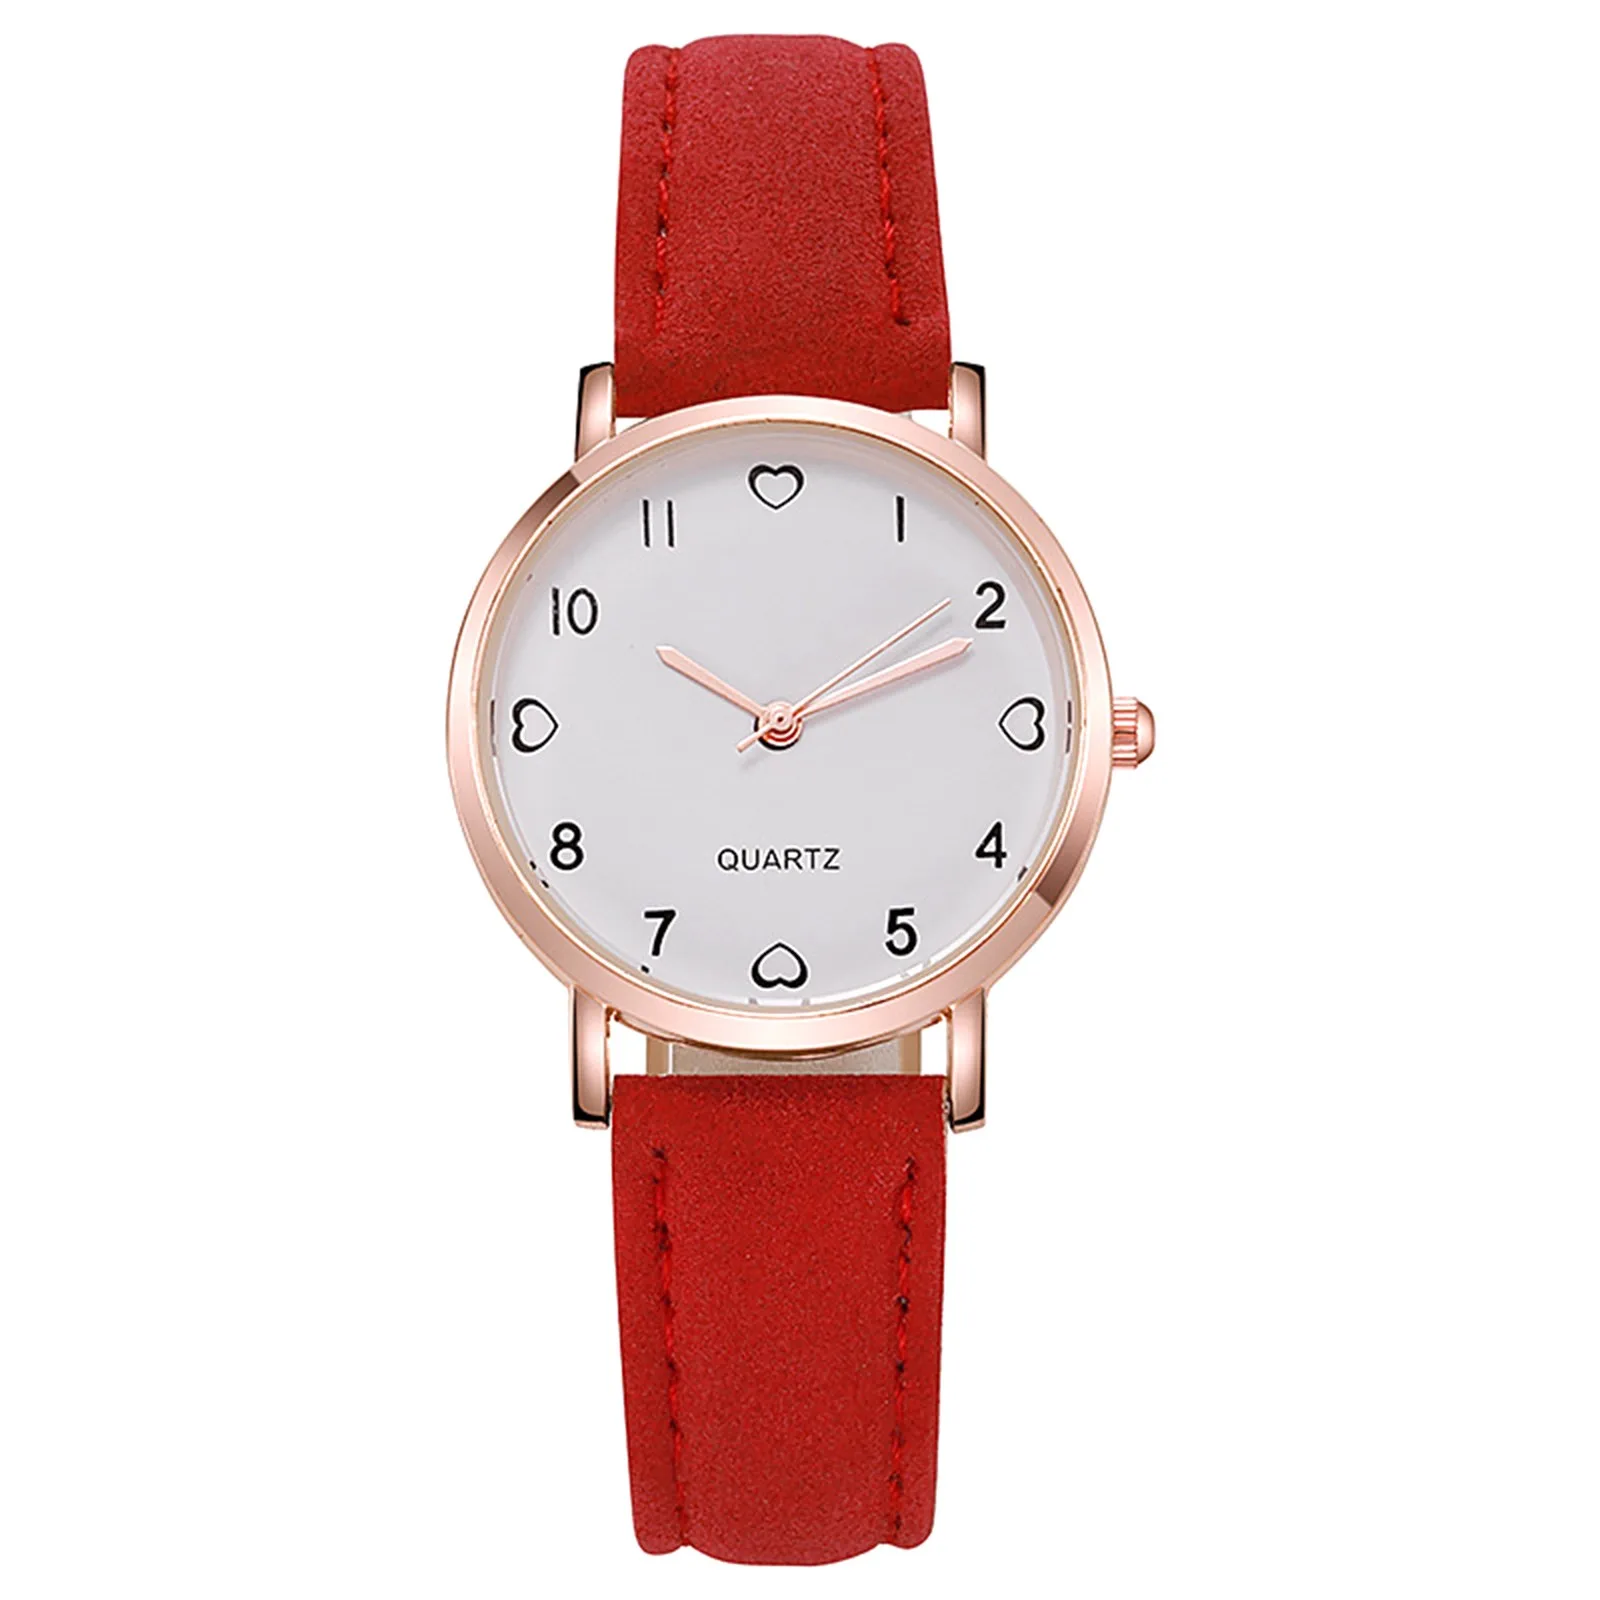 

Women'S Watch Digital Dial Quartz Leather Wristband Gift Suitable For Women And Girls Luxury Quartz Wristwatch For Ladies Gift